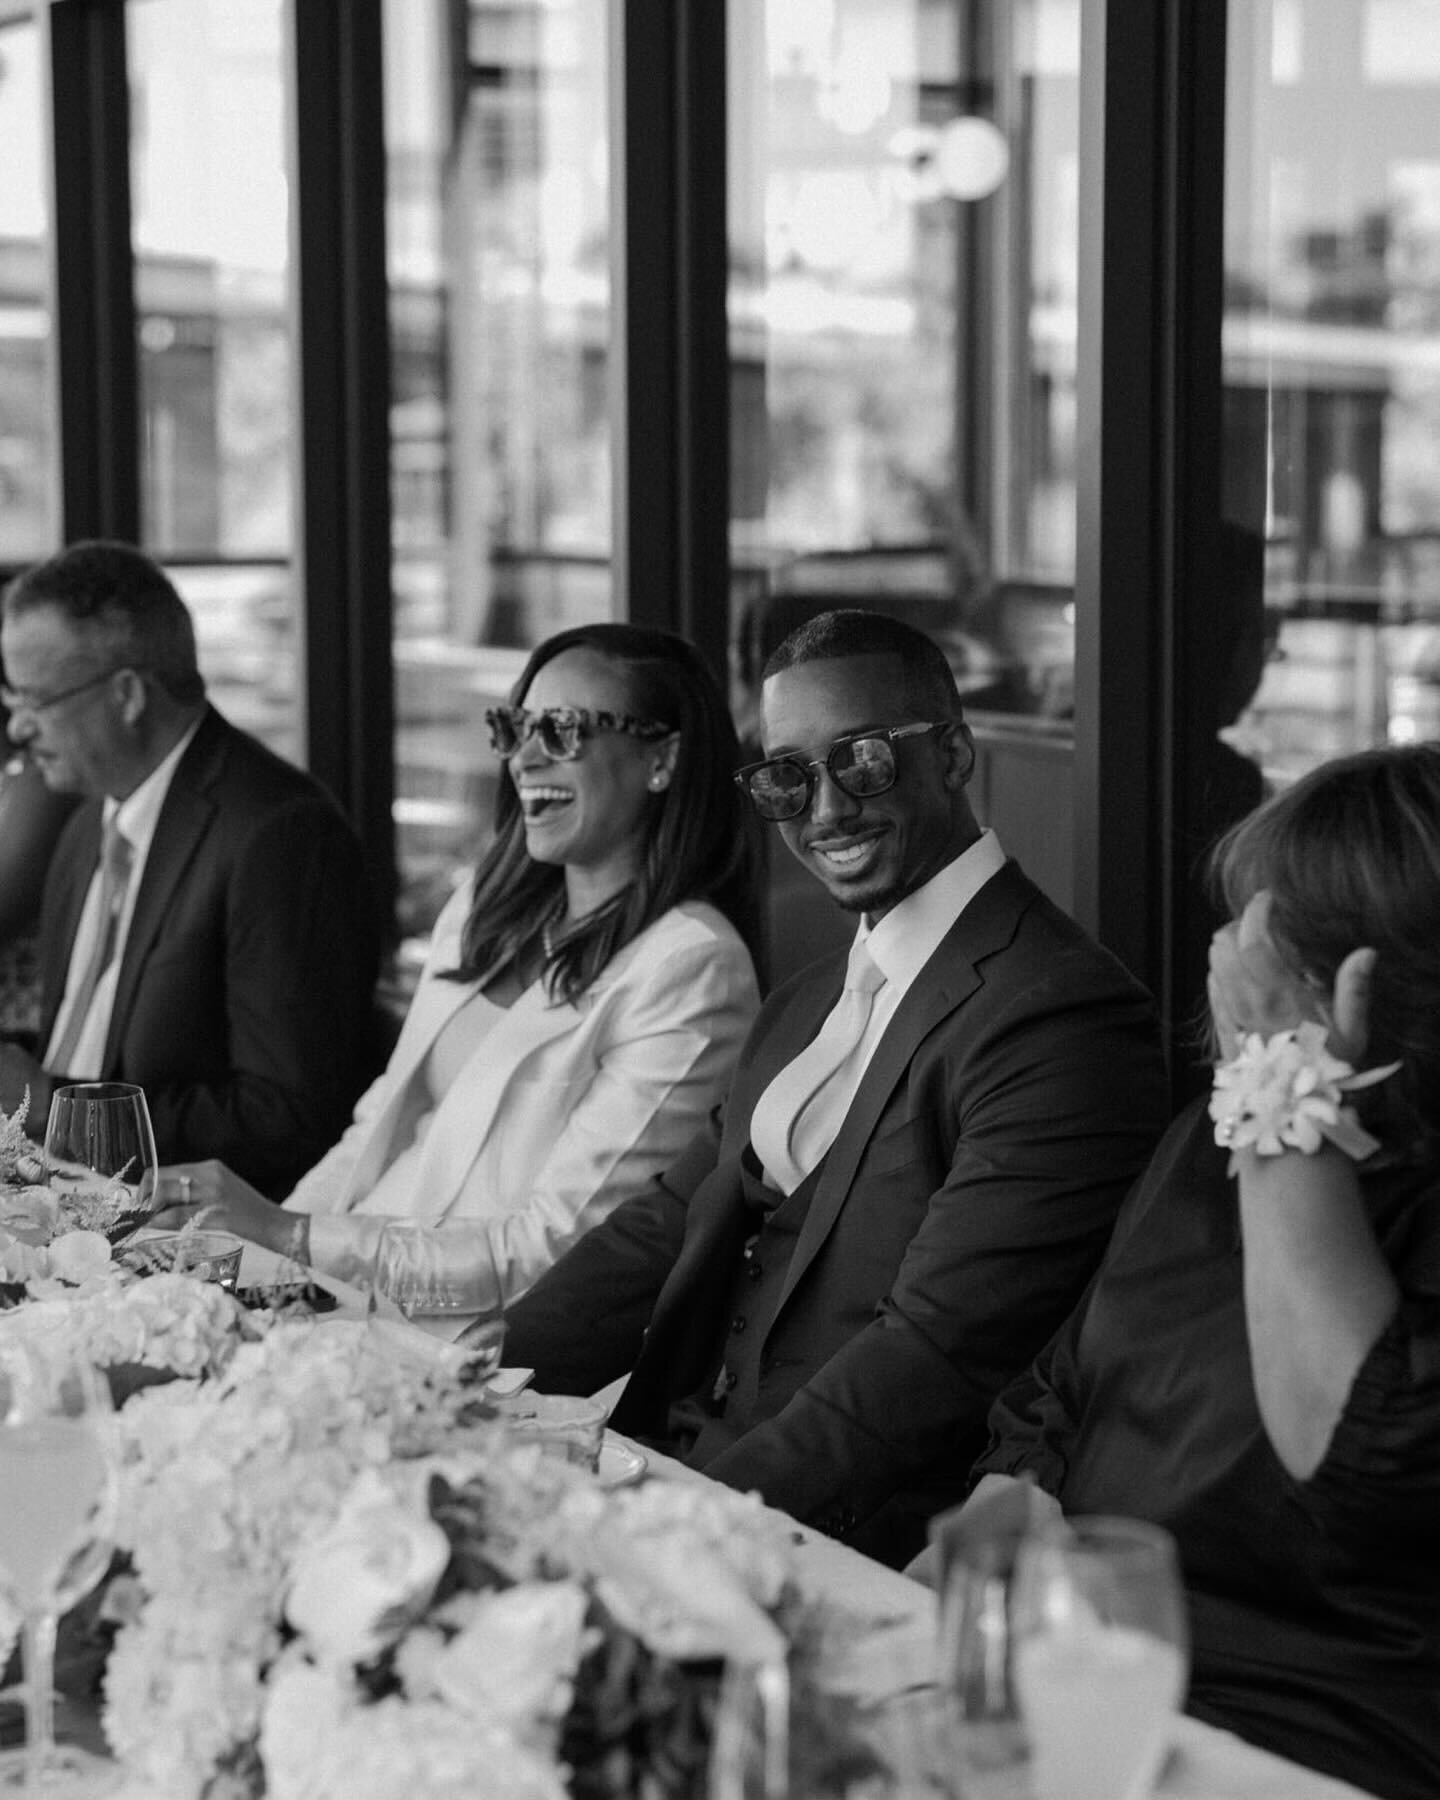 Meaghan &amp; Andrew had the sweetest courthouse wedding back in September! It was followed by brunch with some of their favorite people on a private restaurant patio in DC 🤍 I love being a part of days like this. 

P.S. 🗣️ your wedding day can LIT